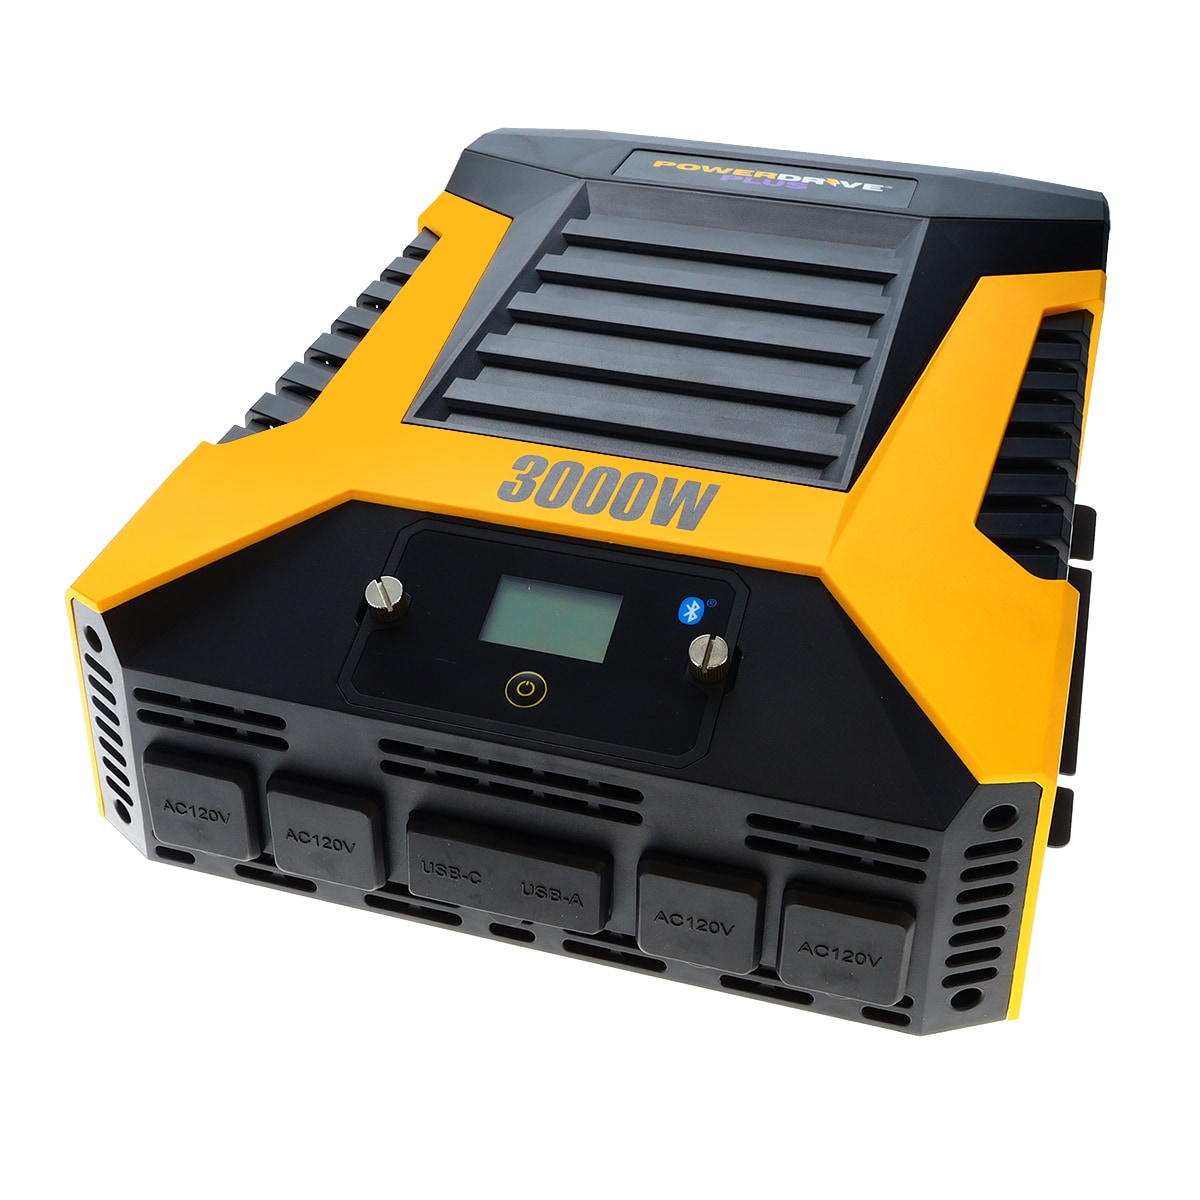 Two-way inverse fast charge 3000W Portable Portable Power Station